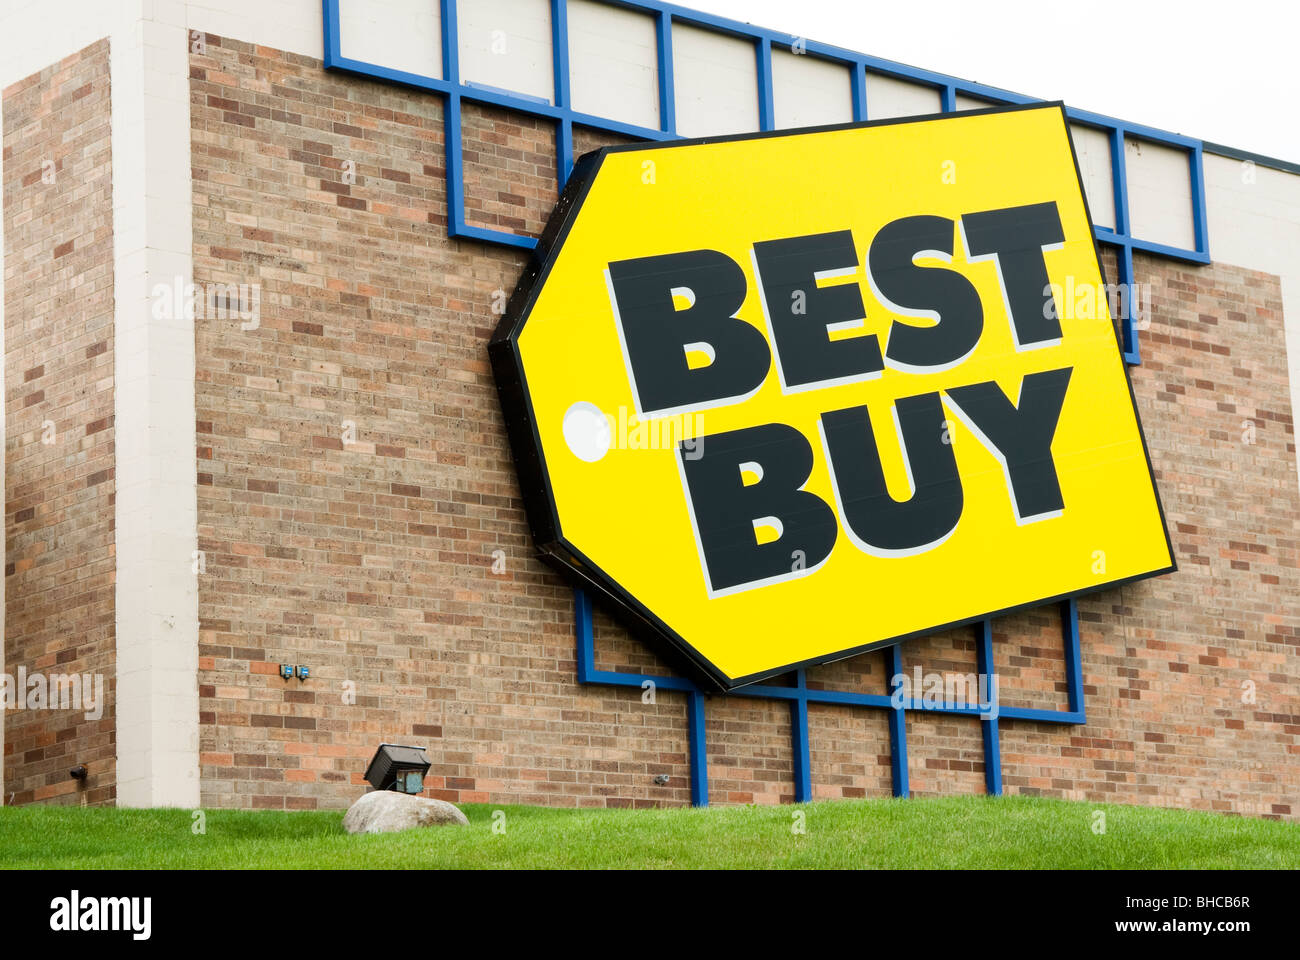 exterior view of a Best Buy retail store Stock Photo